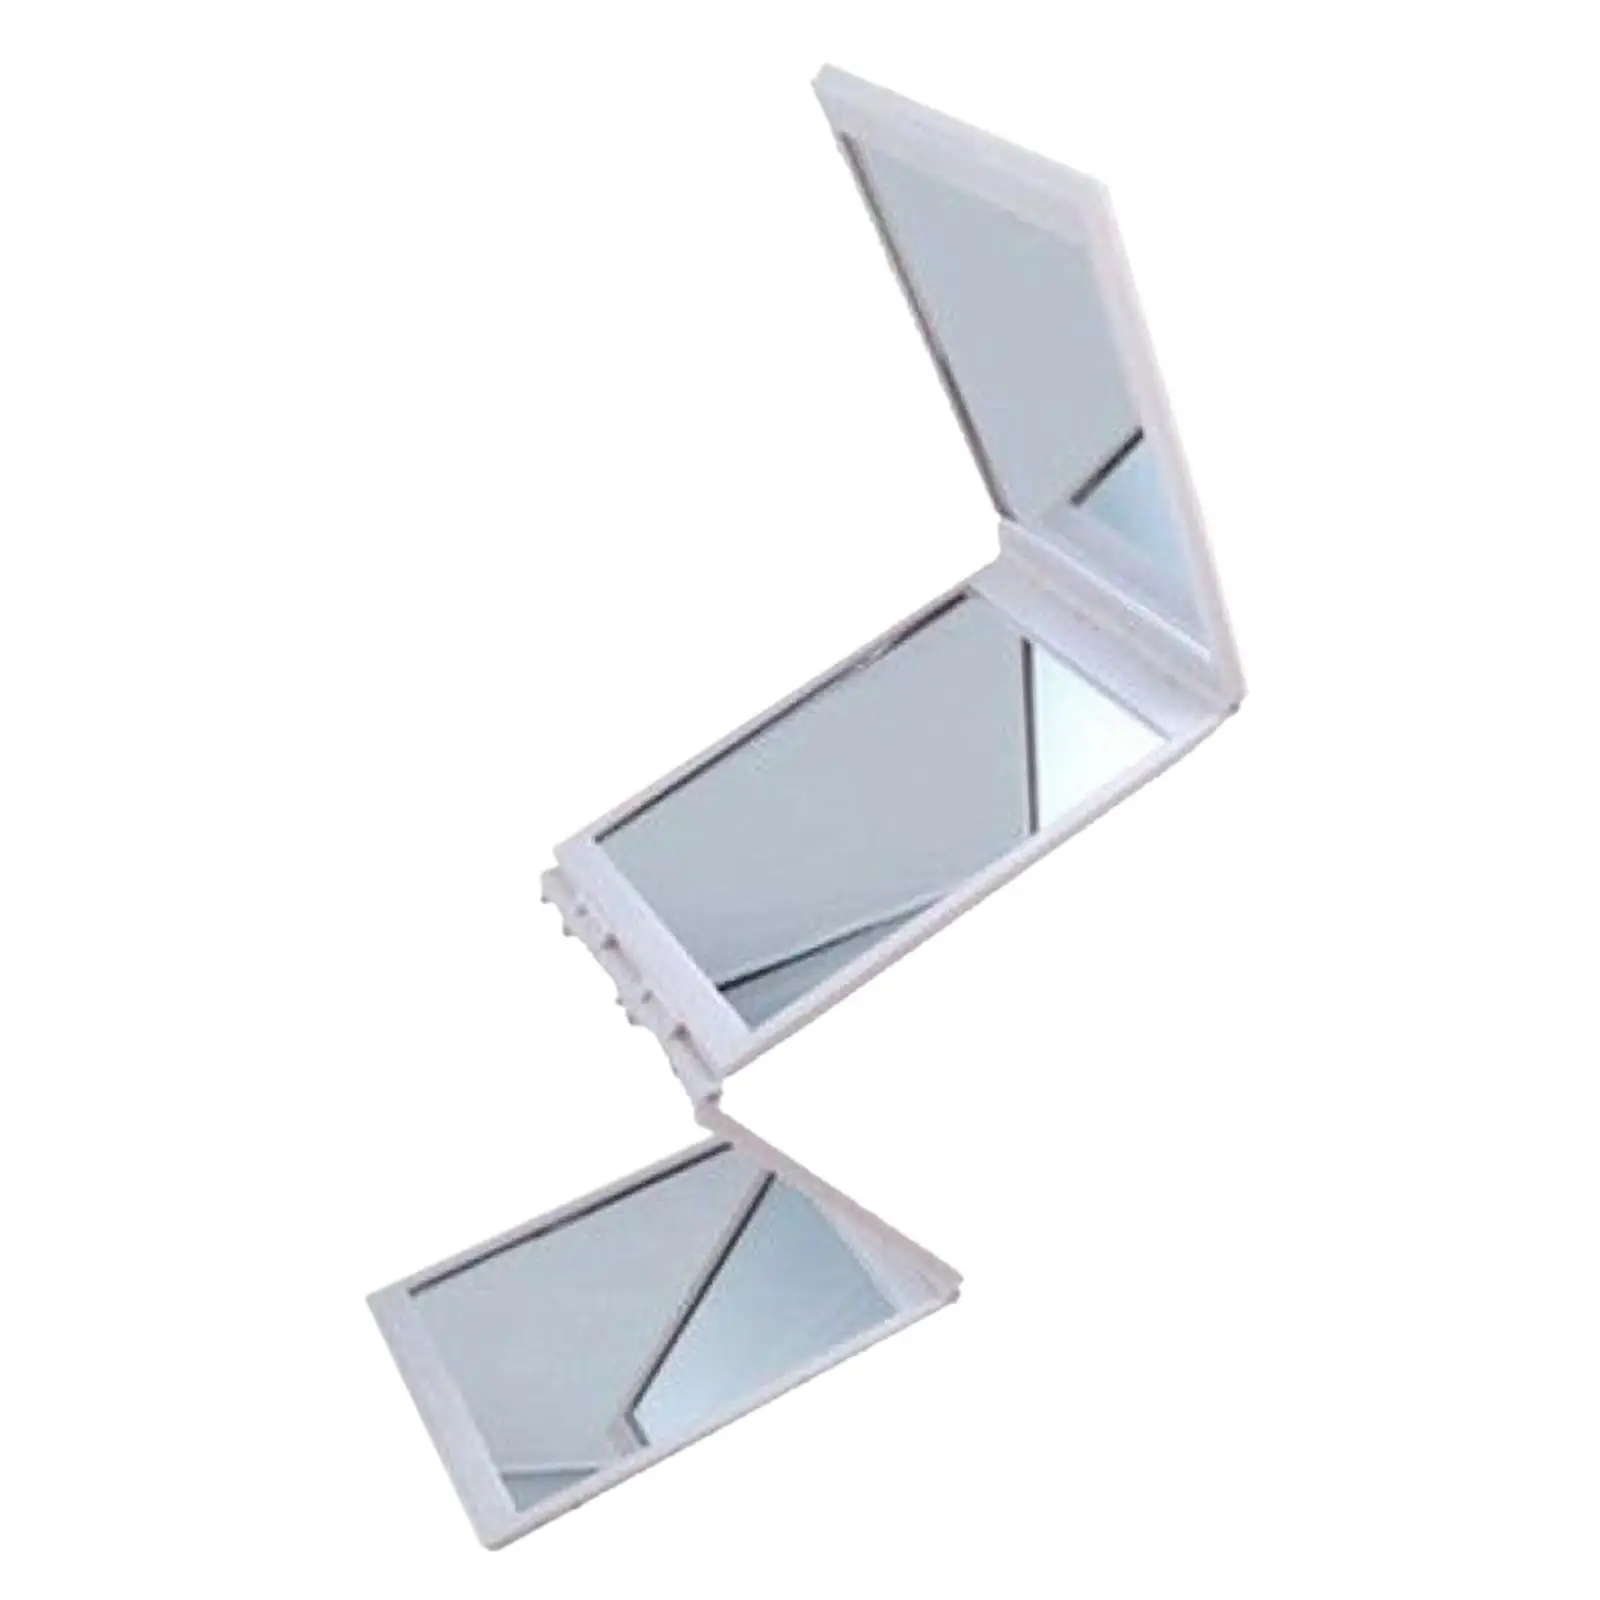 4 Sided Cosmetic Vanity Mirror Adjustable Durable Rectangle for Home Dorm